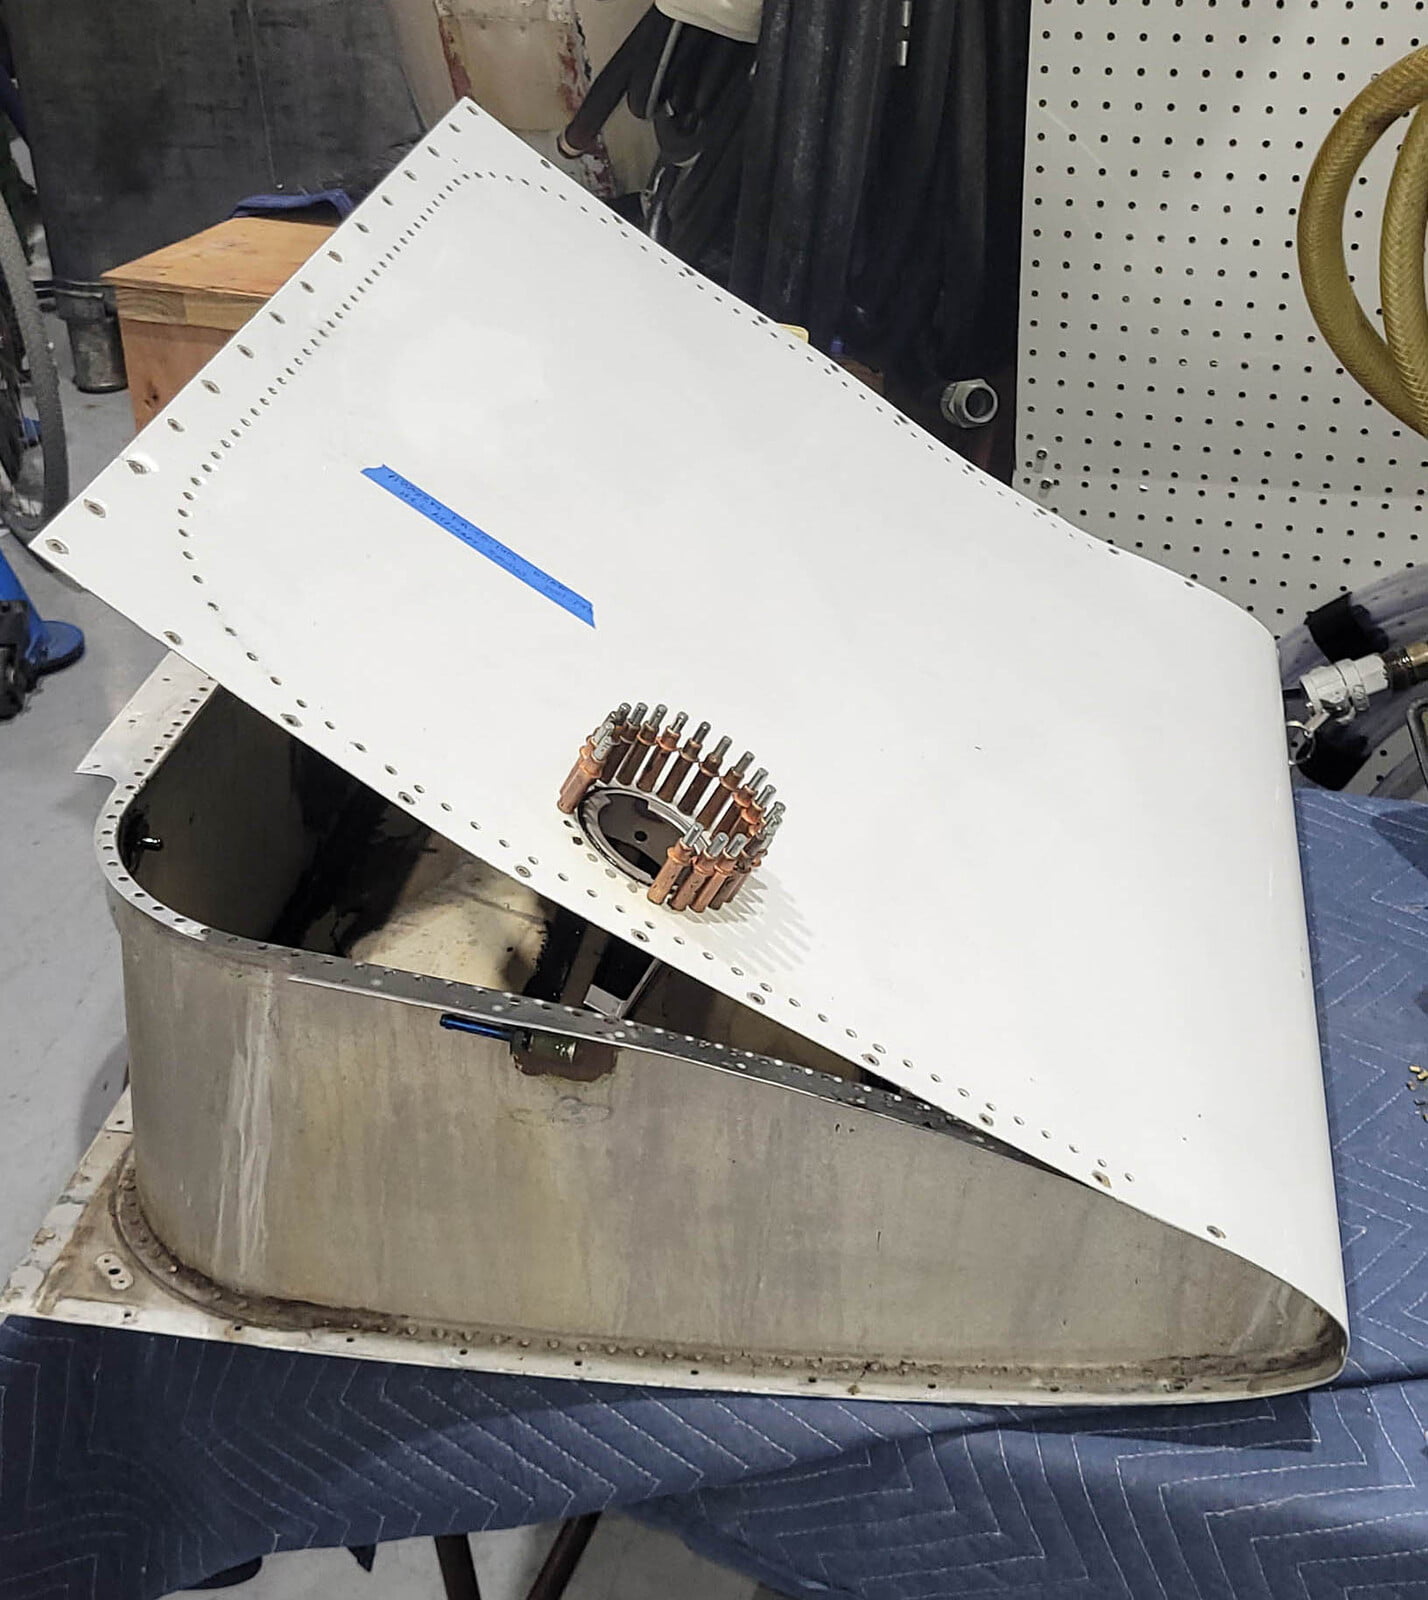 Piper Saratoga fuel tank required a filler neck replacement